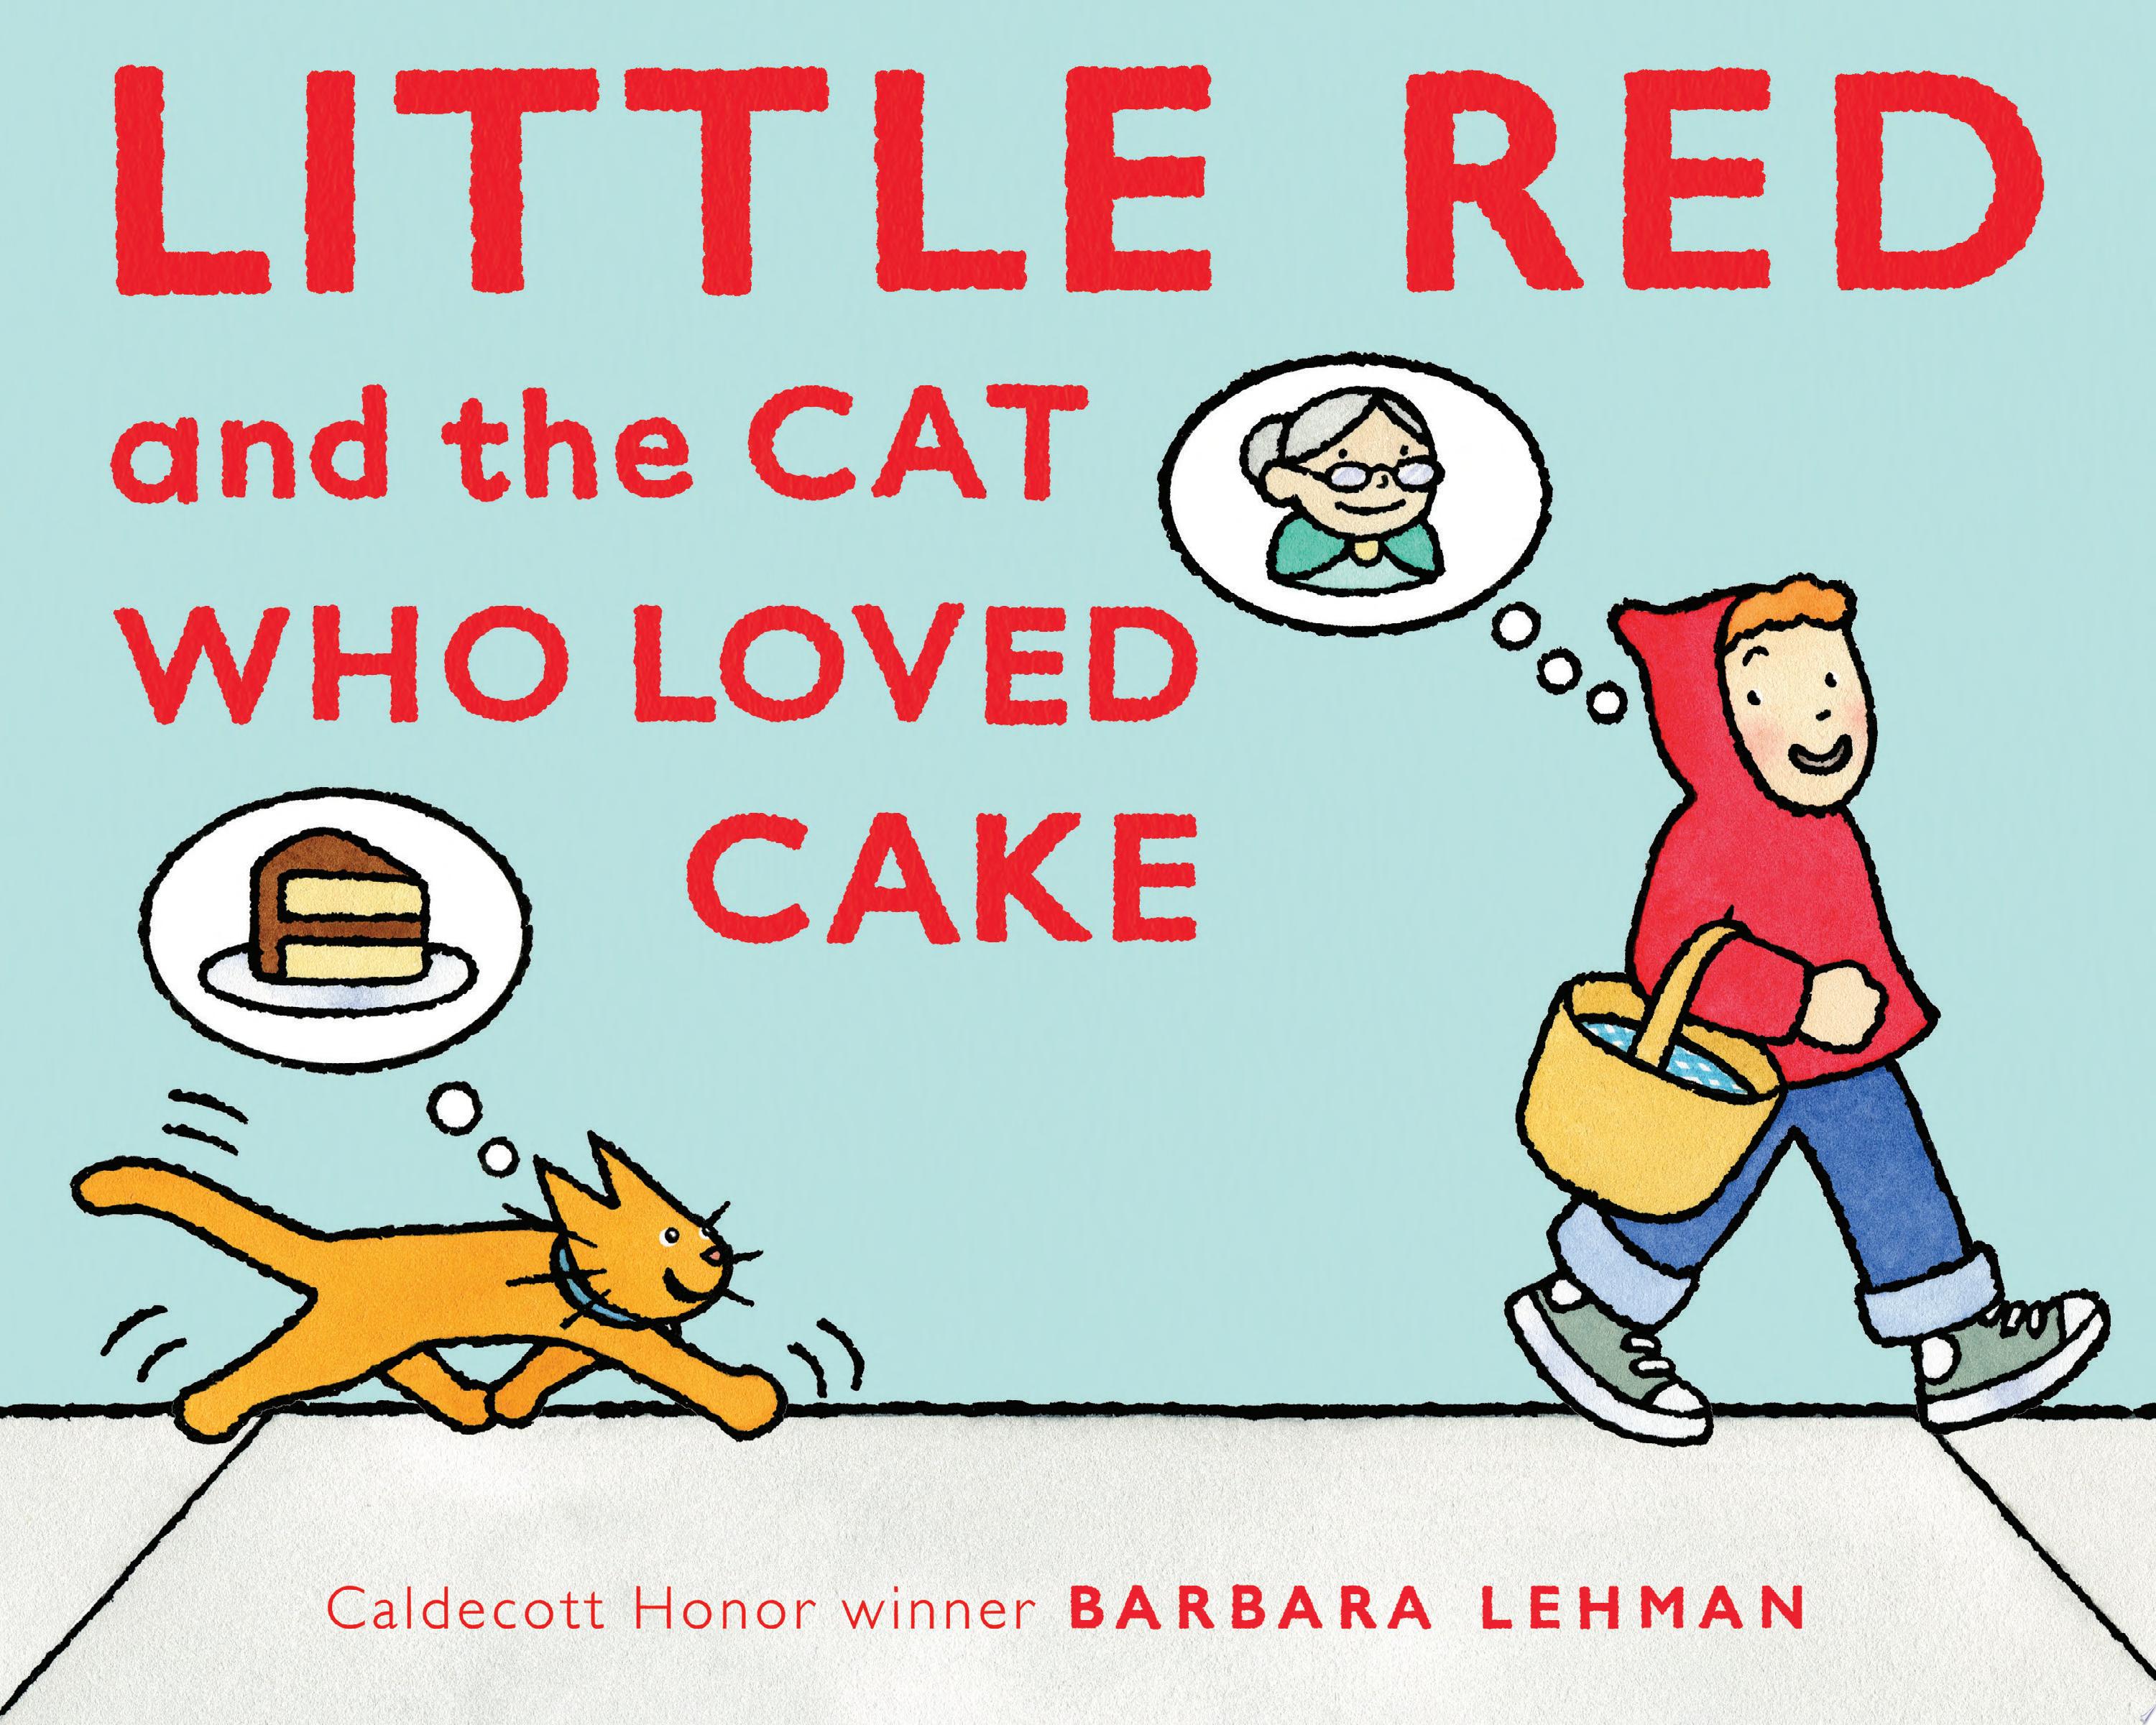 Image for "Little Red and the Cat Who Loved Cake"